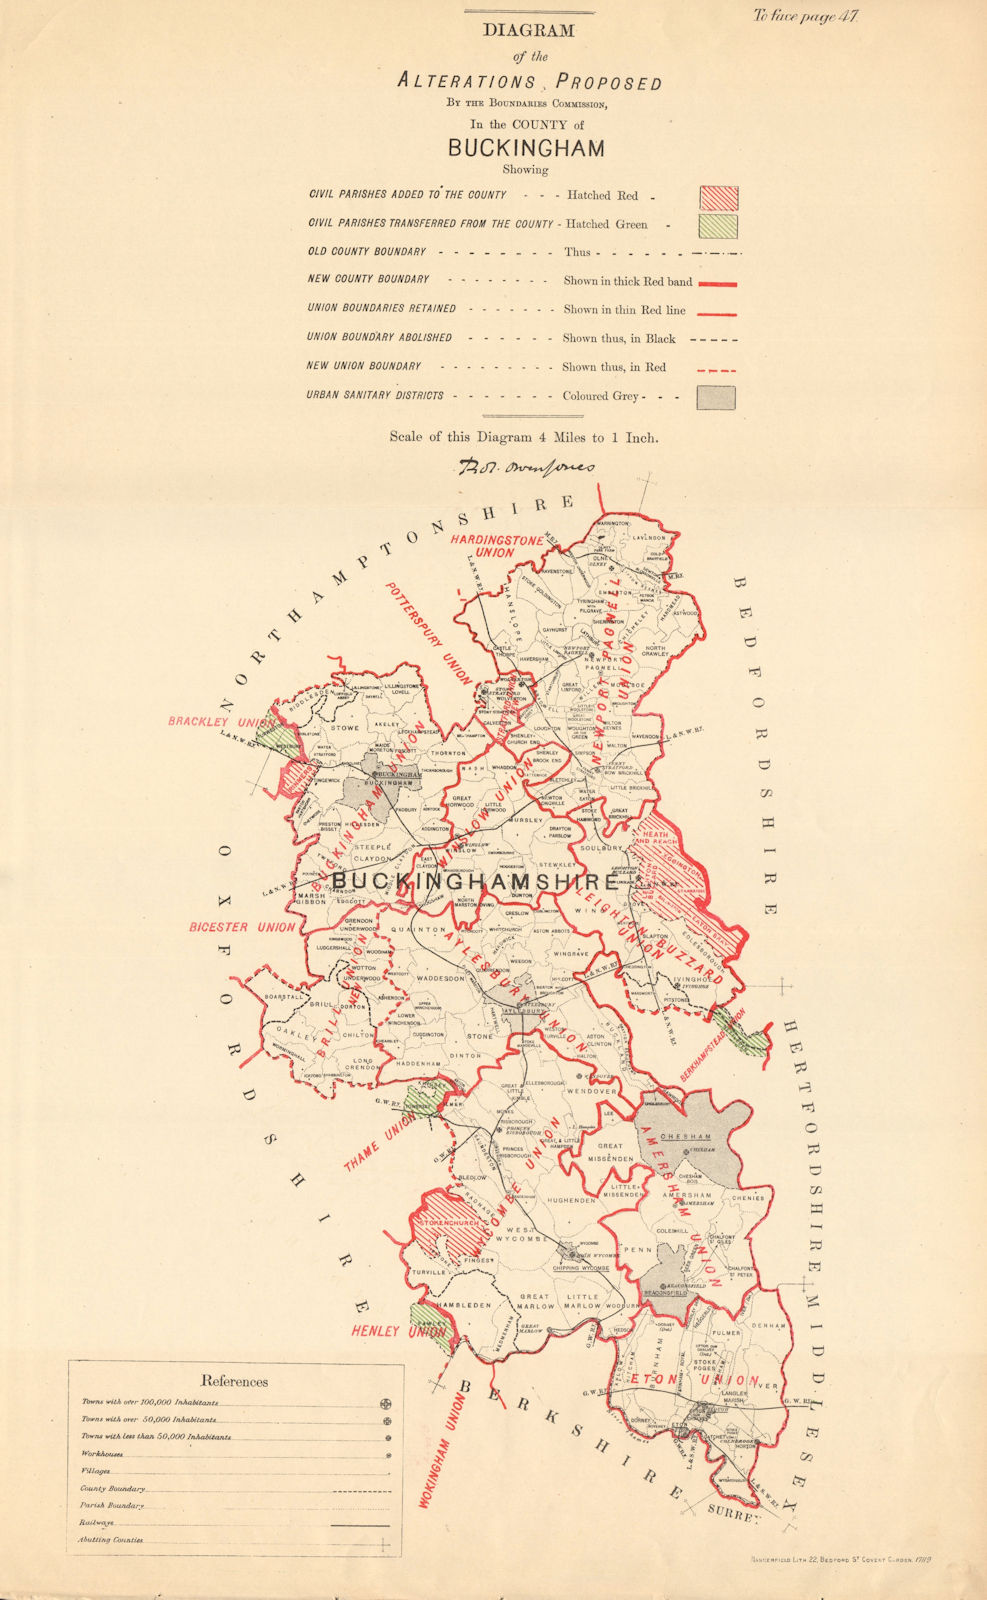 Associate Product Alterations Proposed in Buckinghamshire. JONES. BOUNDARY COMMISSION 1888 map